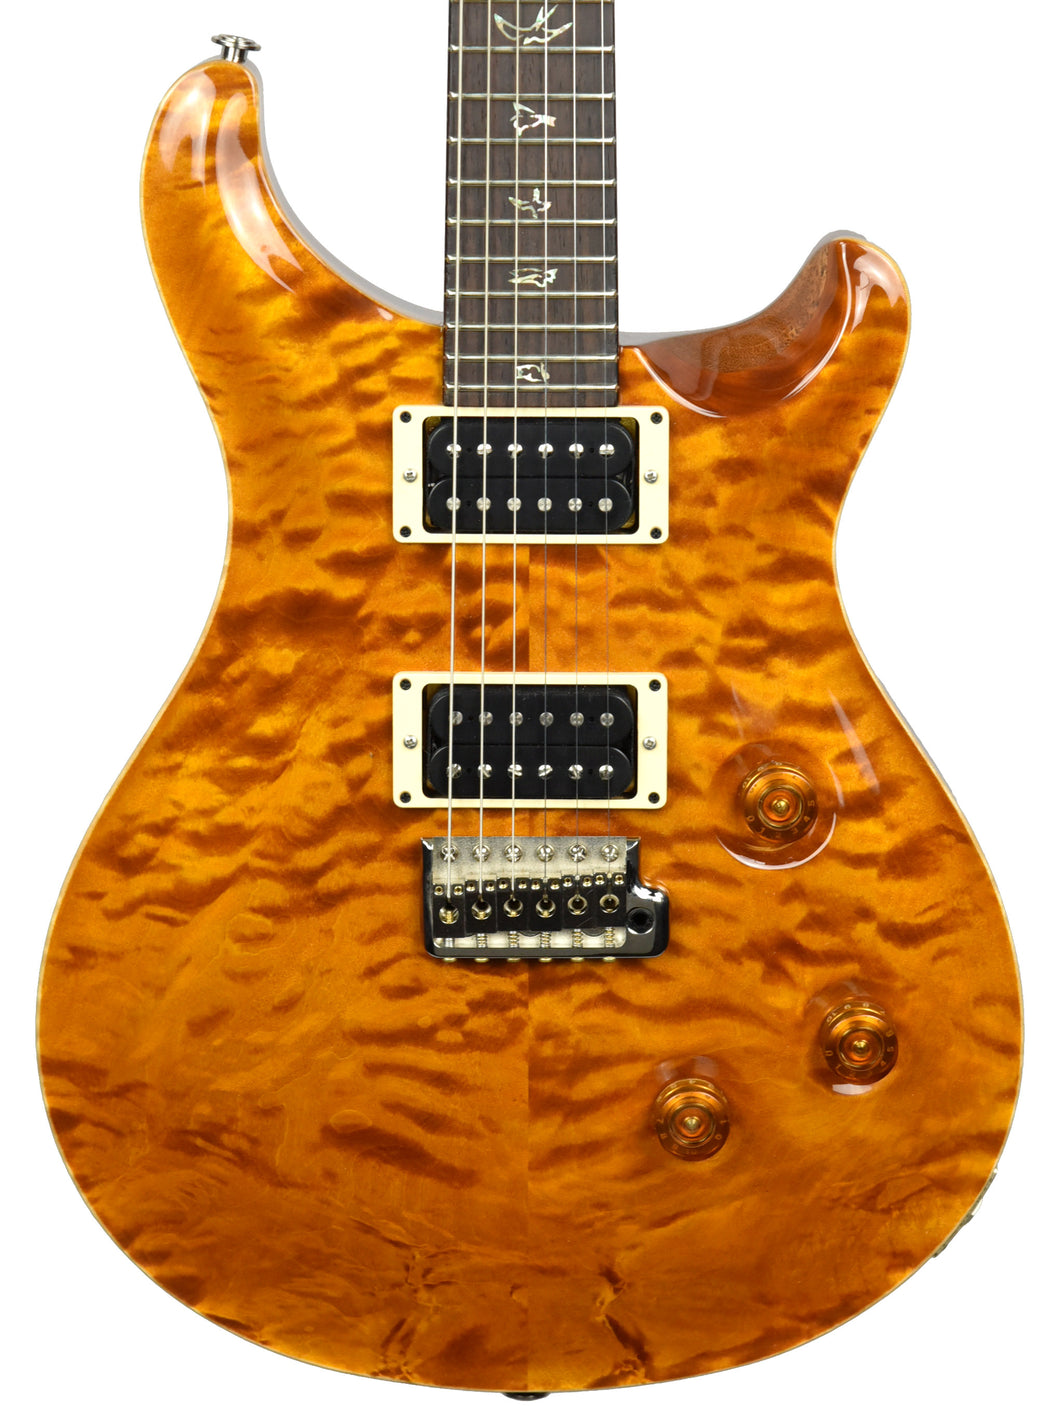 Used 2010 PRS Custom 24 Quilt in Amber 168394 - The Music Gallery